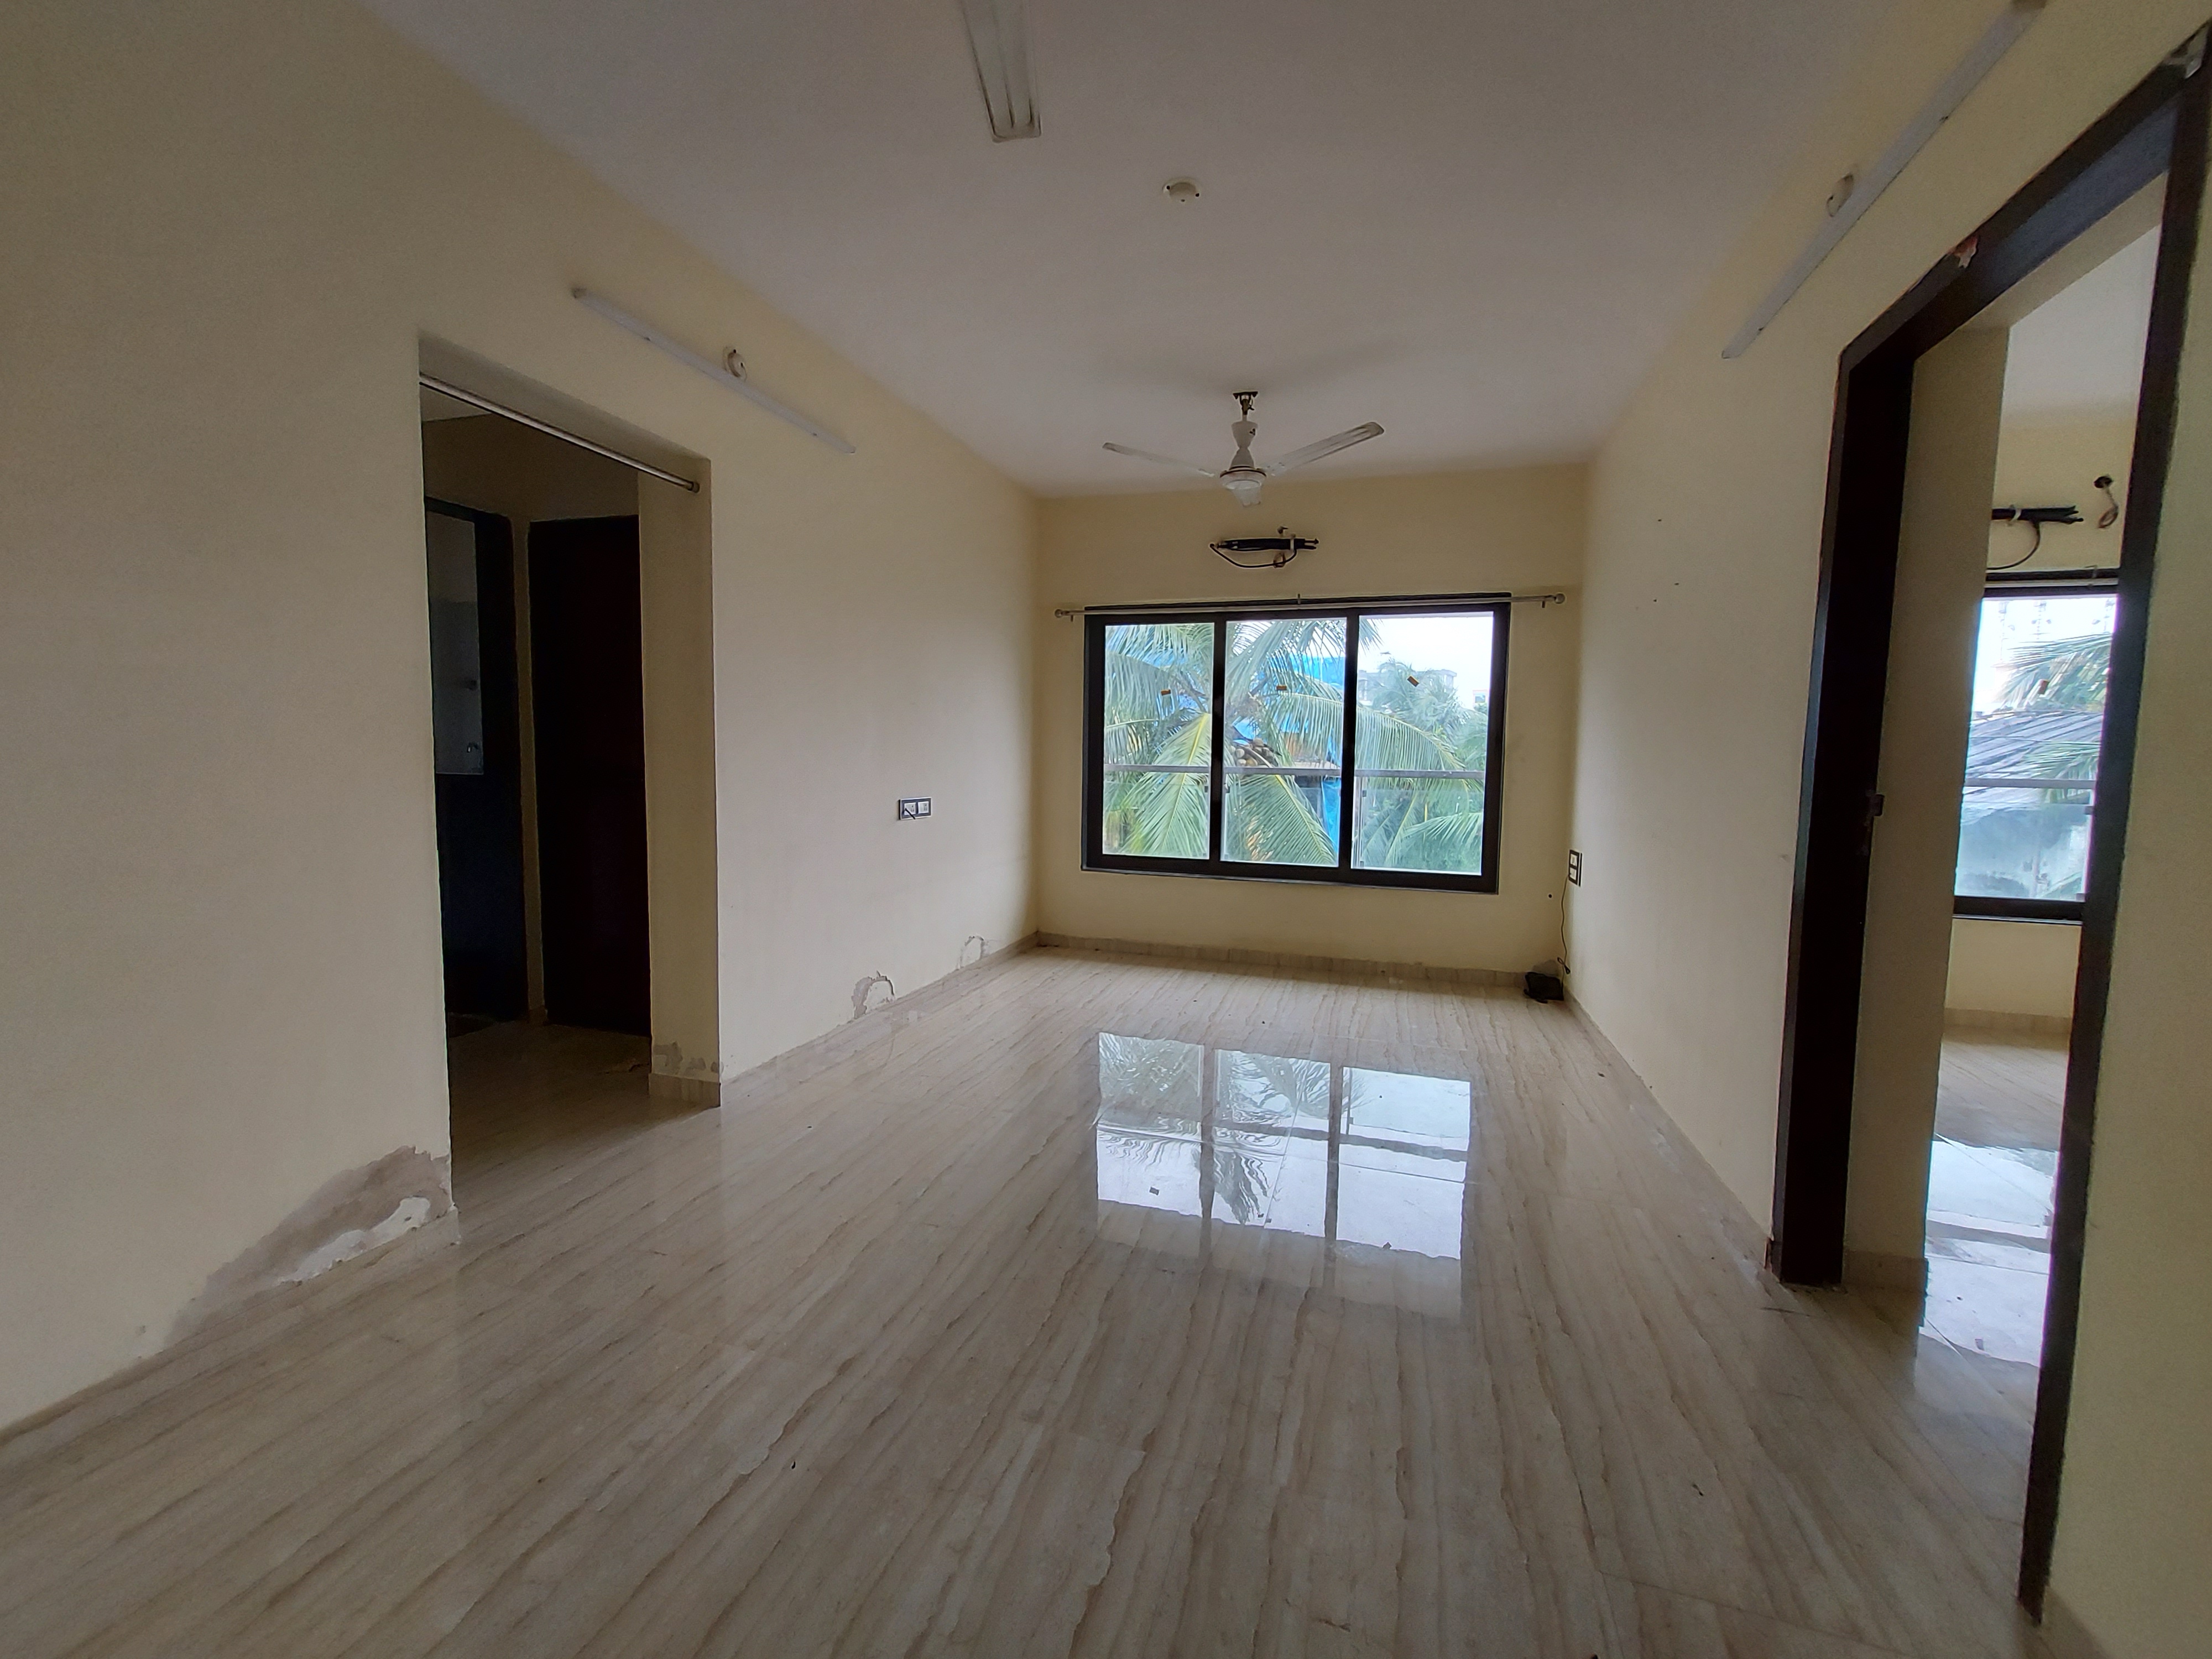 2 BHK Flats for Rent in Andheri East, Mumbai, Double Bedroom Apartments ...